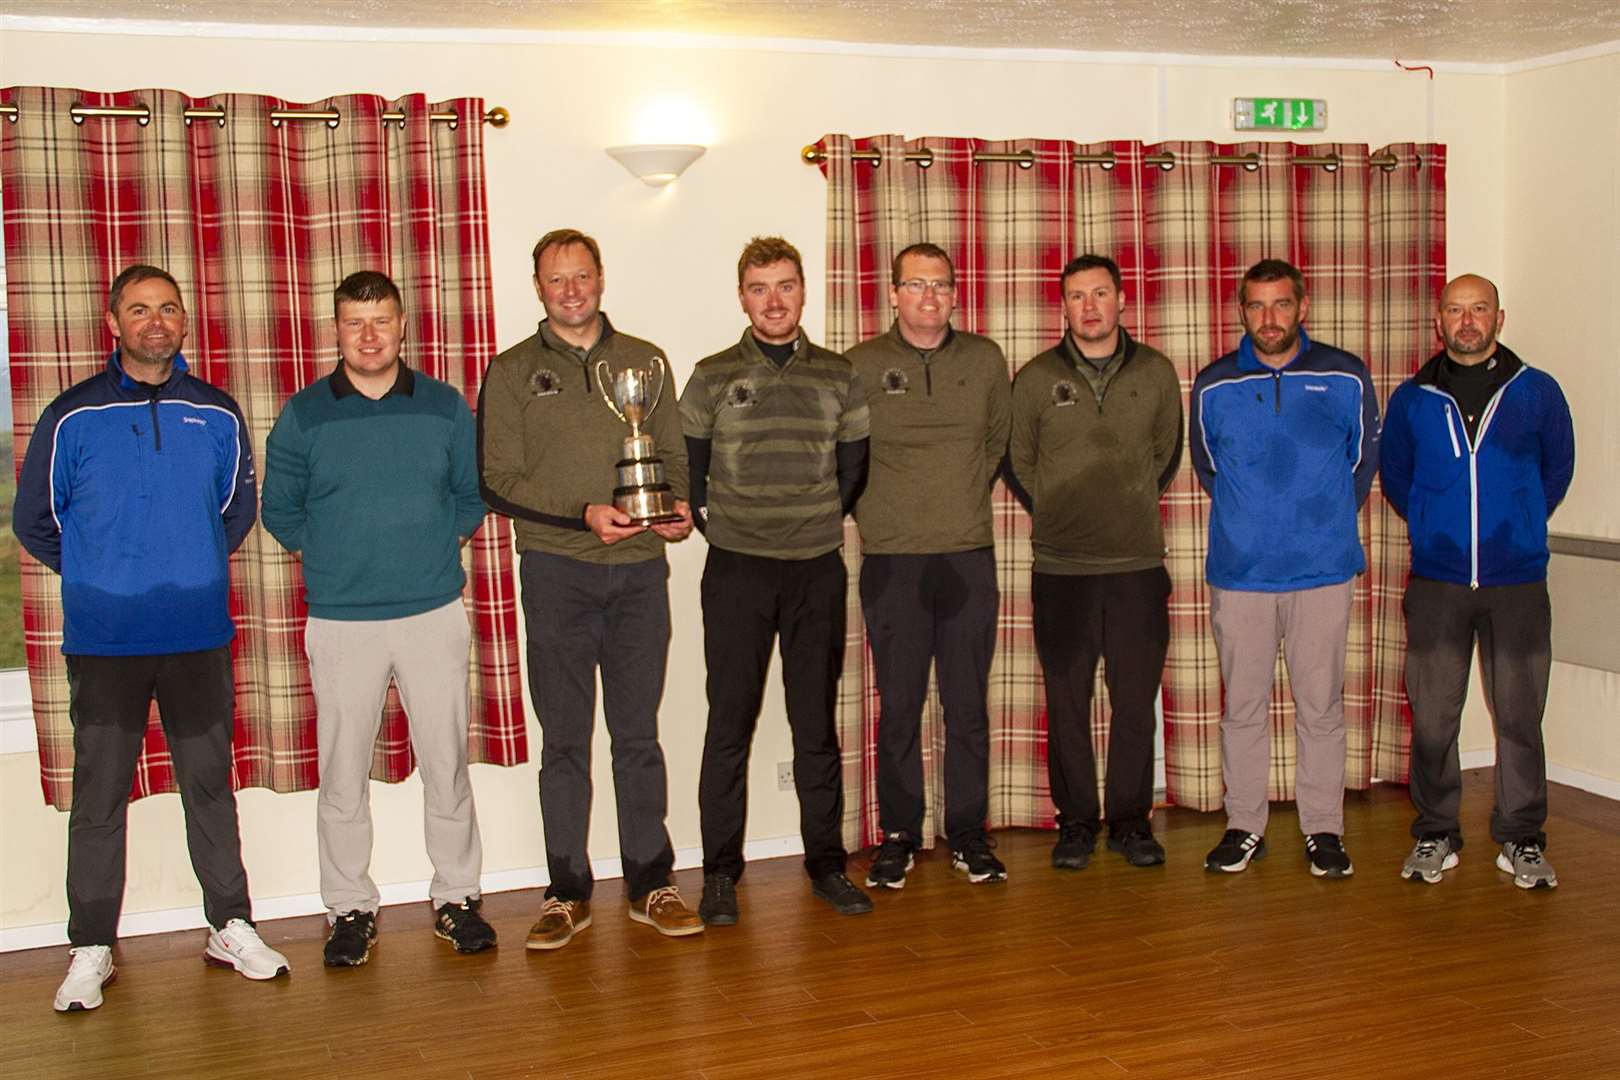 From left: Ulbster Cup finalists Gordie Steven, Alan Larnach (both Wick 'A'), Colin Paterson, Tom Ross, Brent Munro, Michael Smith (all Reay 'A'), Dougie Thorburn and Alan Forbes (Wick 'A').